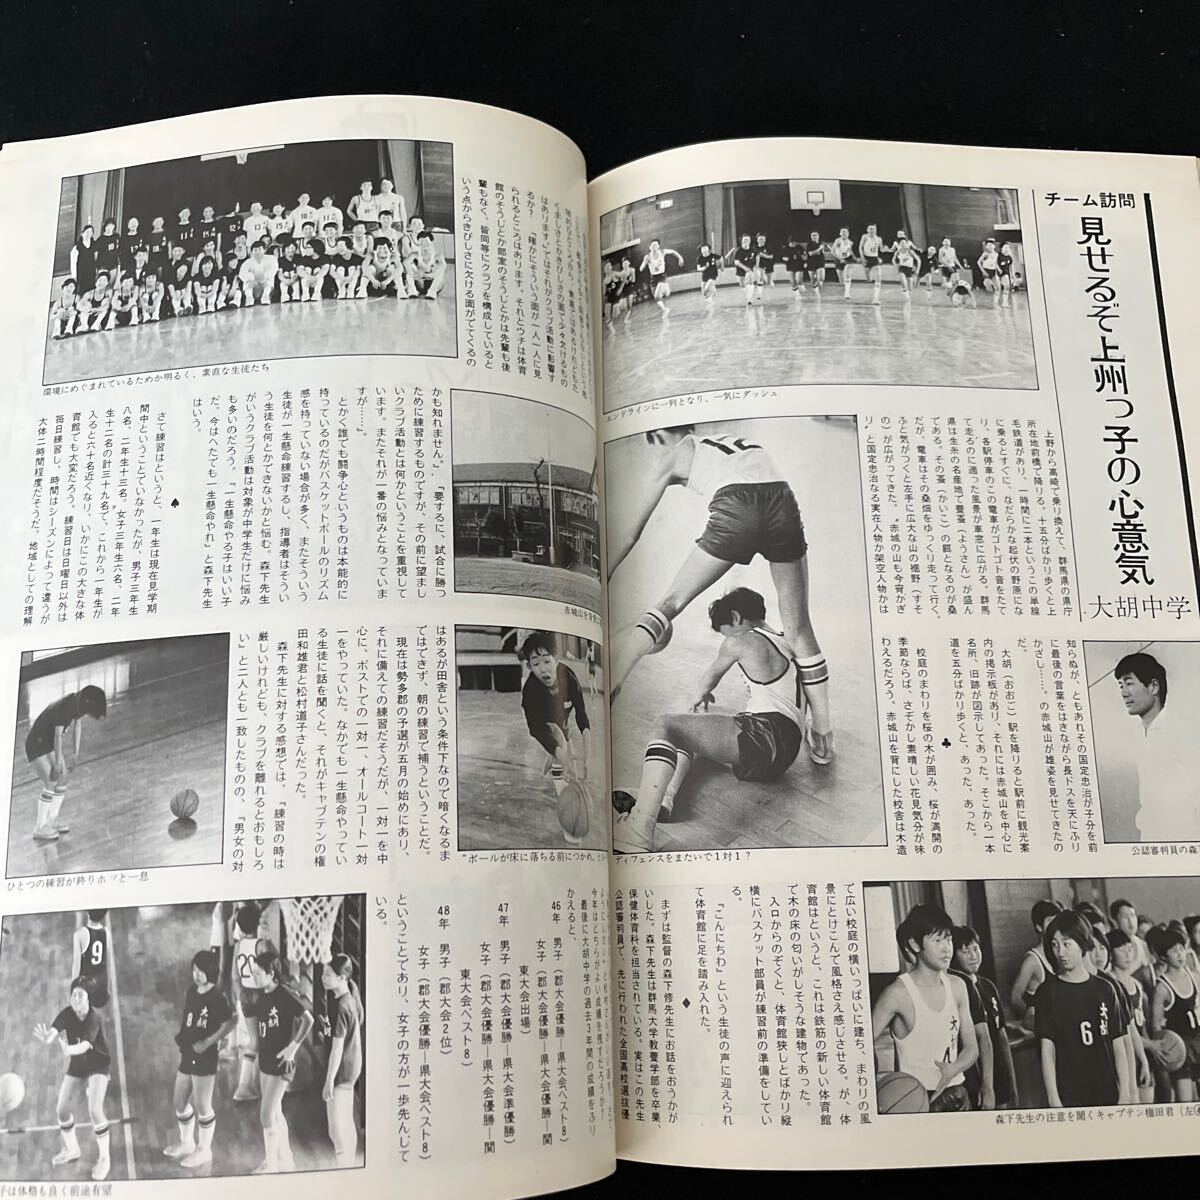  monthly basketball 0 Showa era 49 year 5 month 25 day issue 0 all Japan woman Europe ... ..0 basketball 0 Mini bus 0 day text . publish corporation 